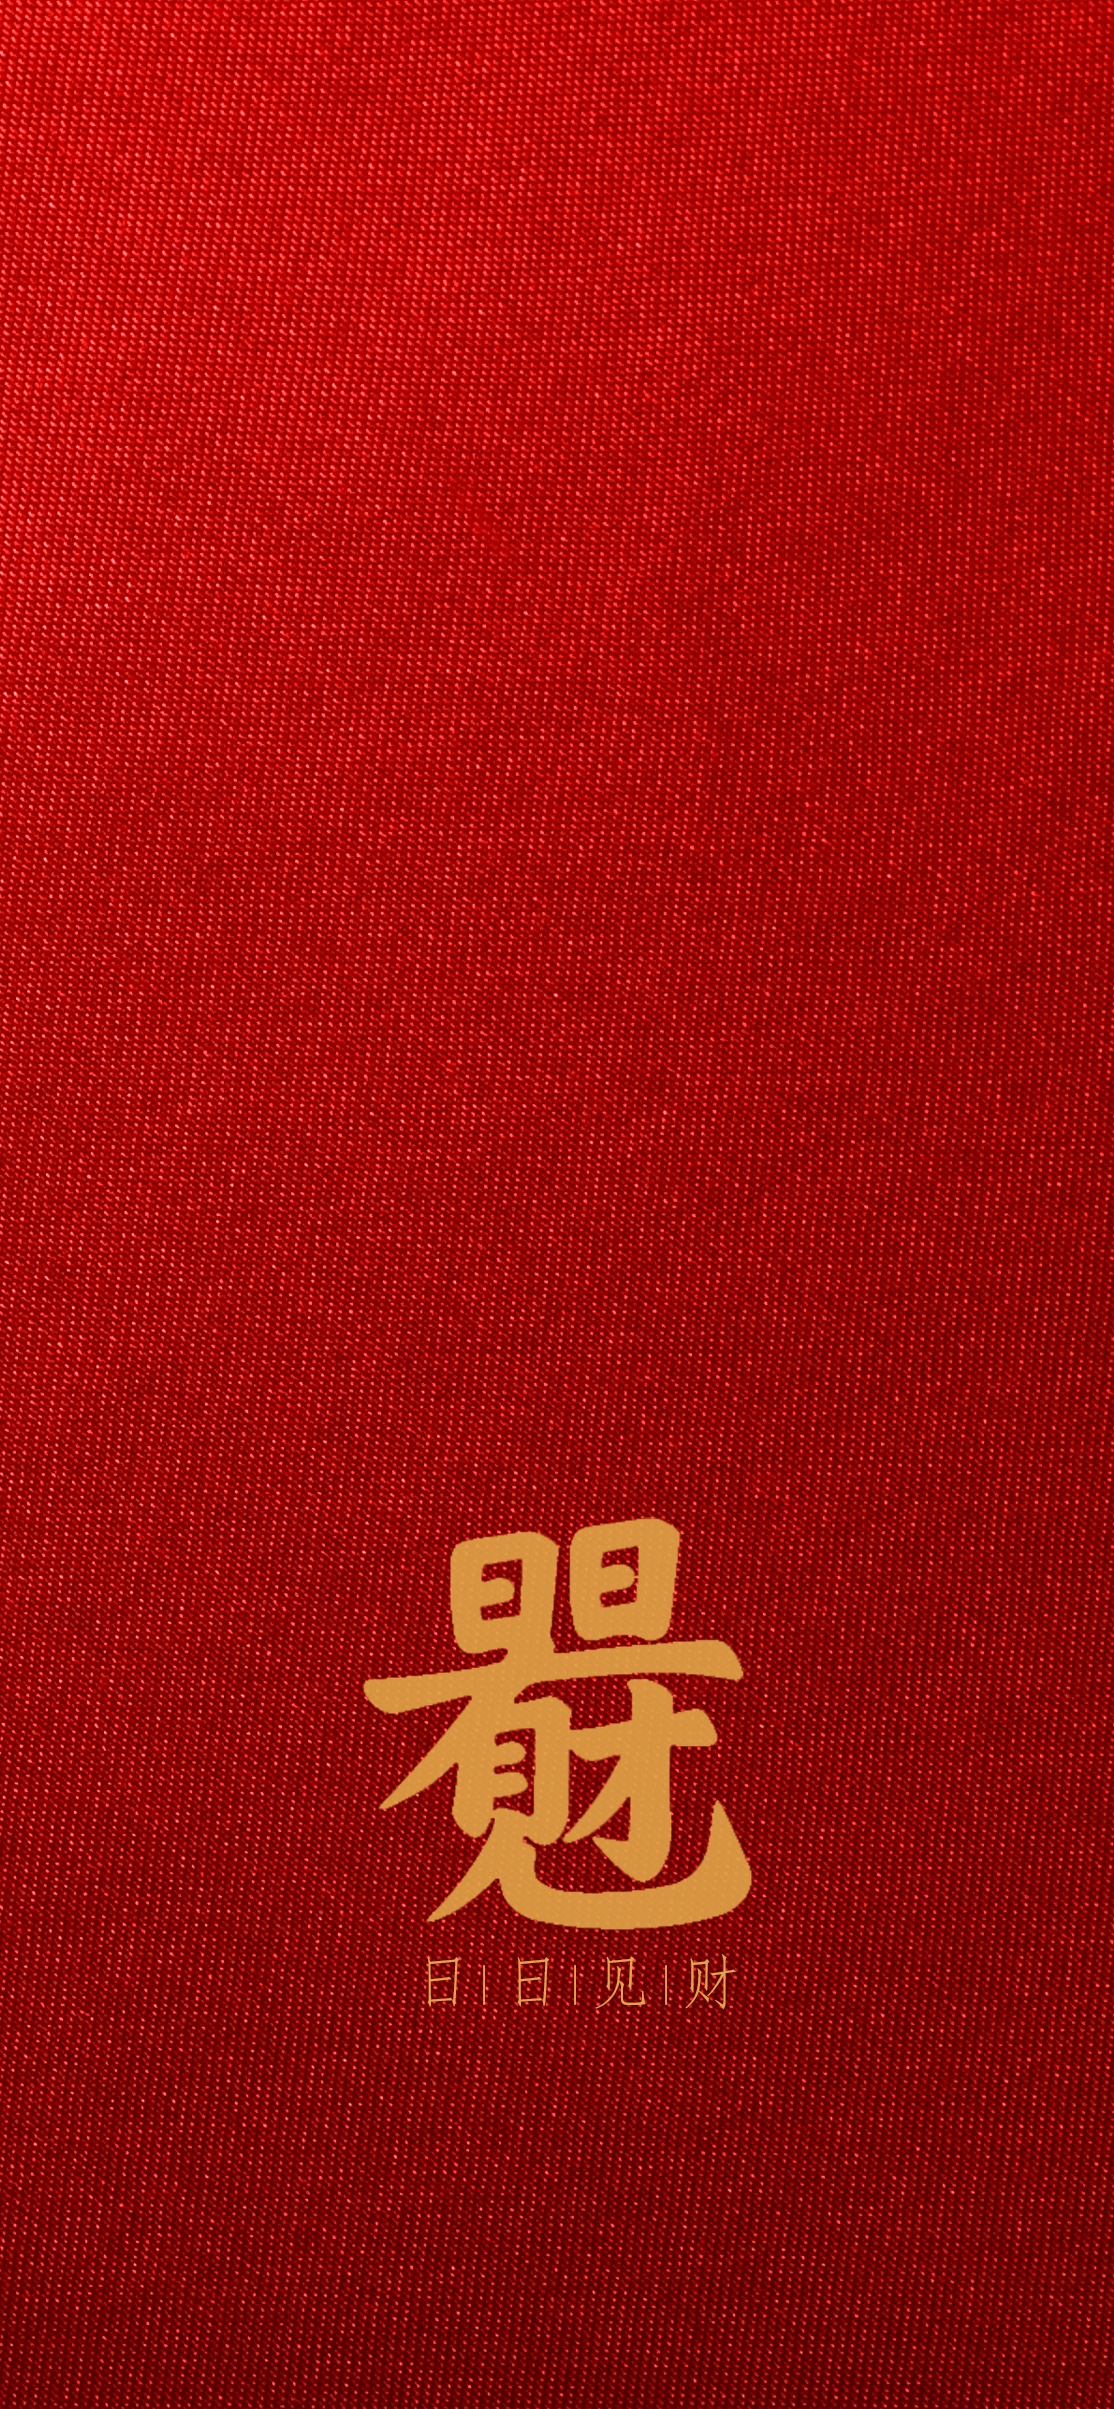 New Year China Red Blessing Cellphone Vertical Minimalism Simple Background Red Background 1114x2409